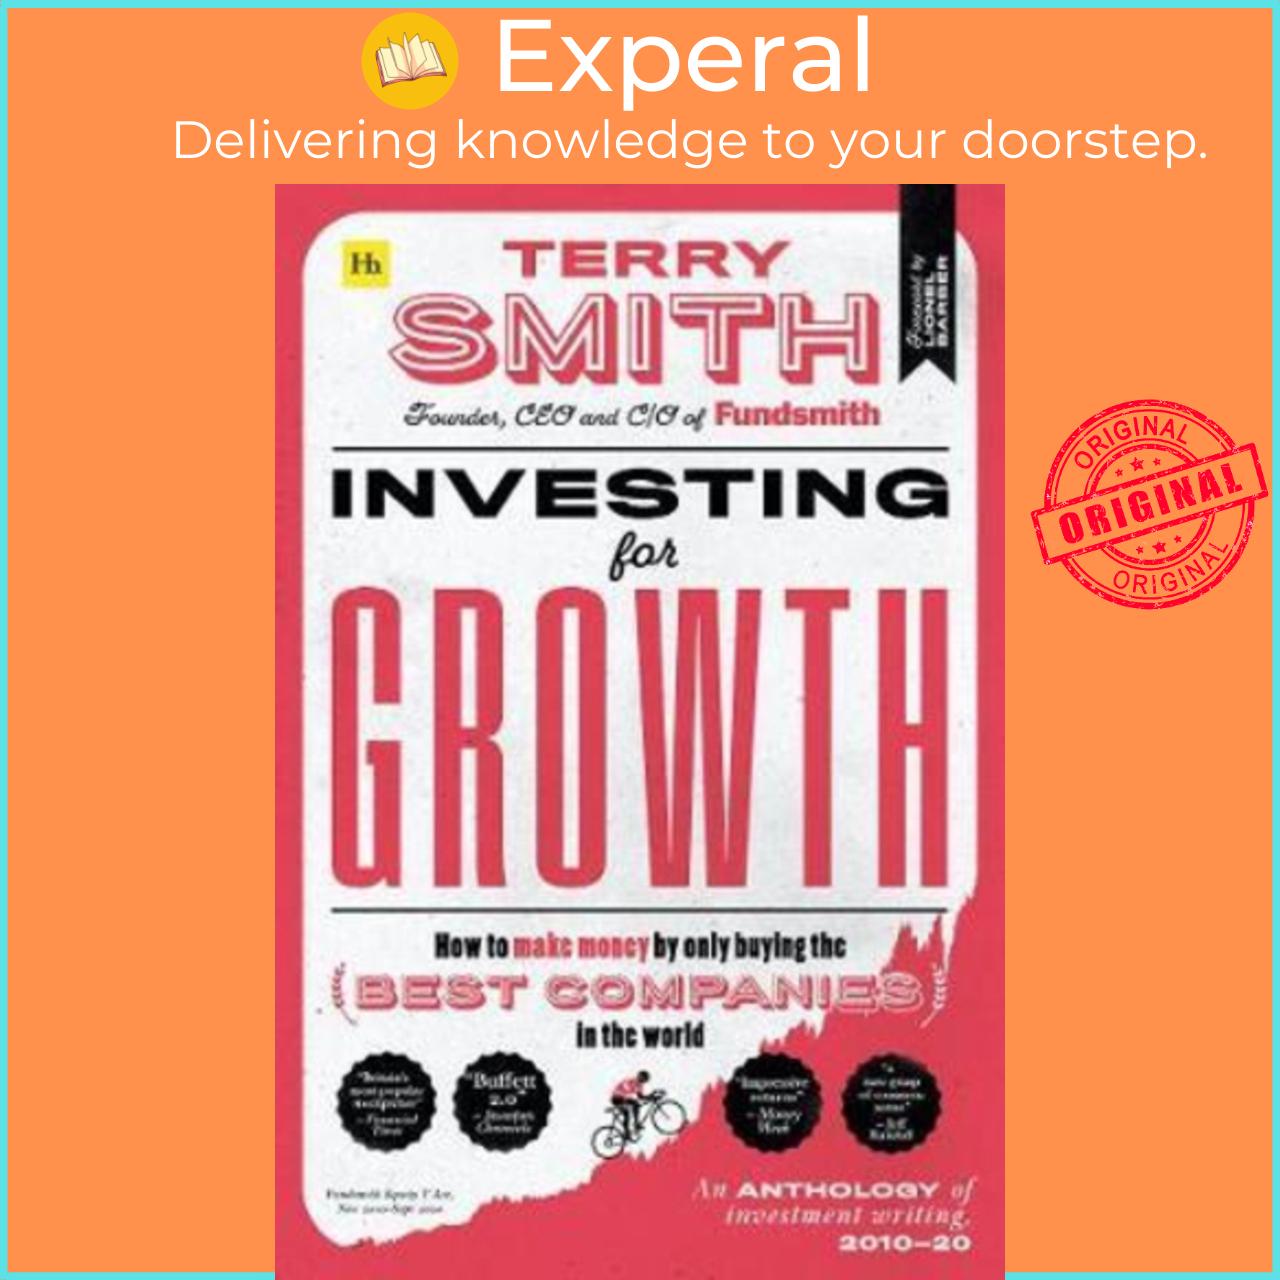 Sách - Investing for Growth : How to make money by only buying the best companies by Terry Smith (UK edition, hardcover)